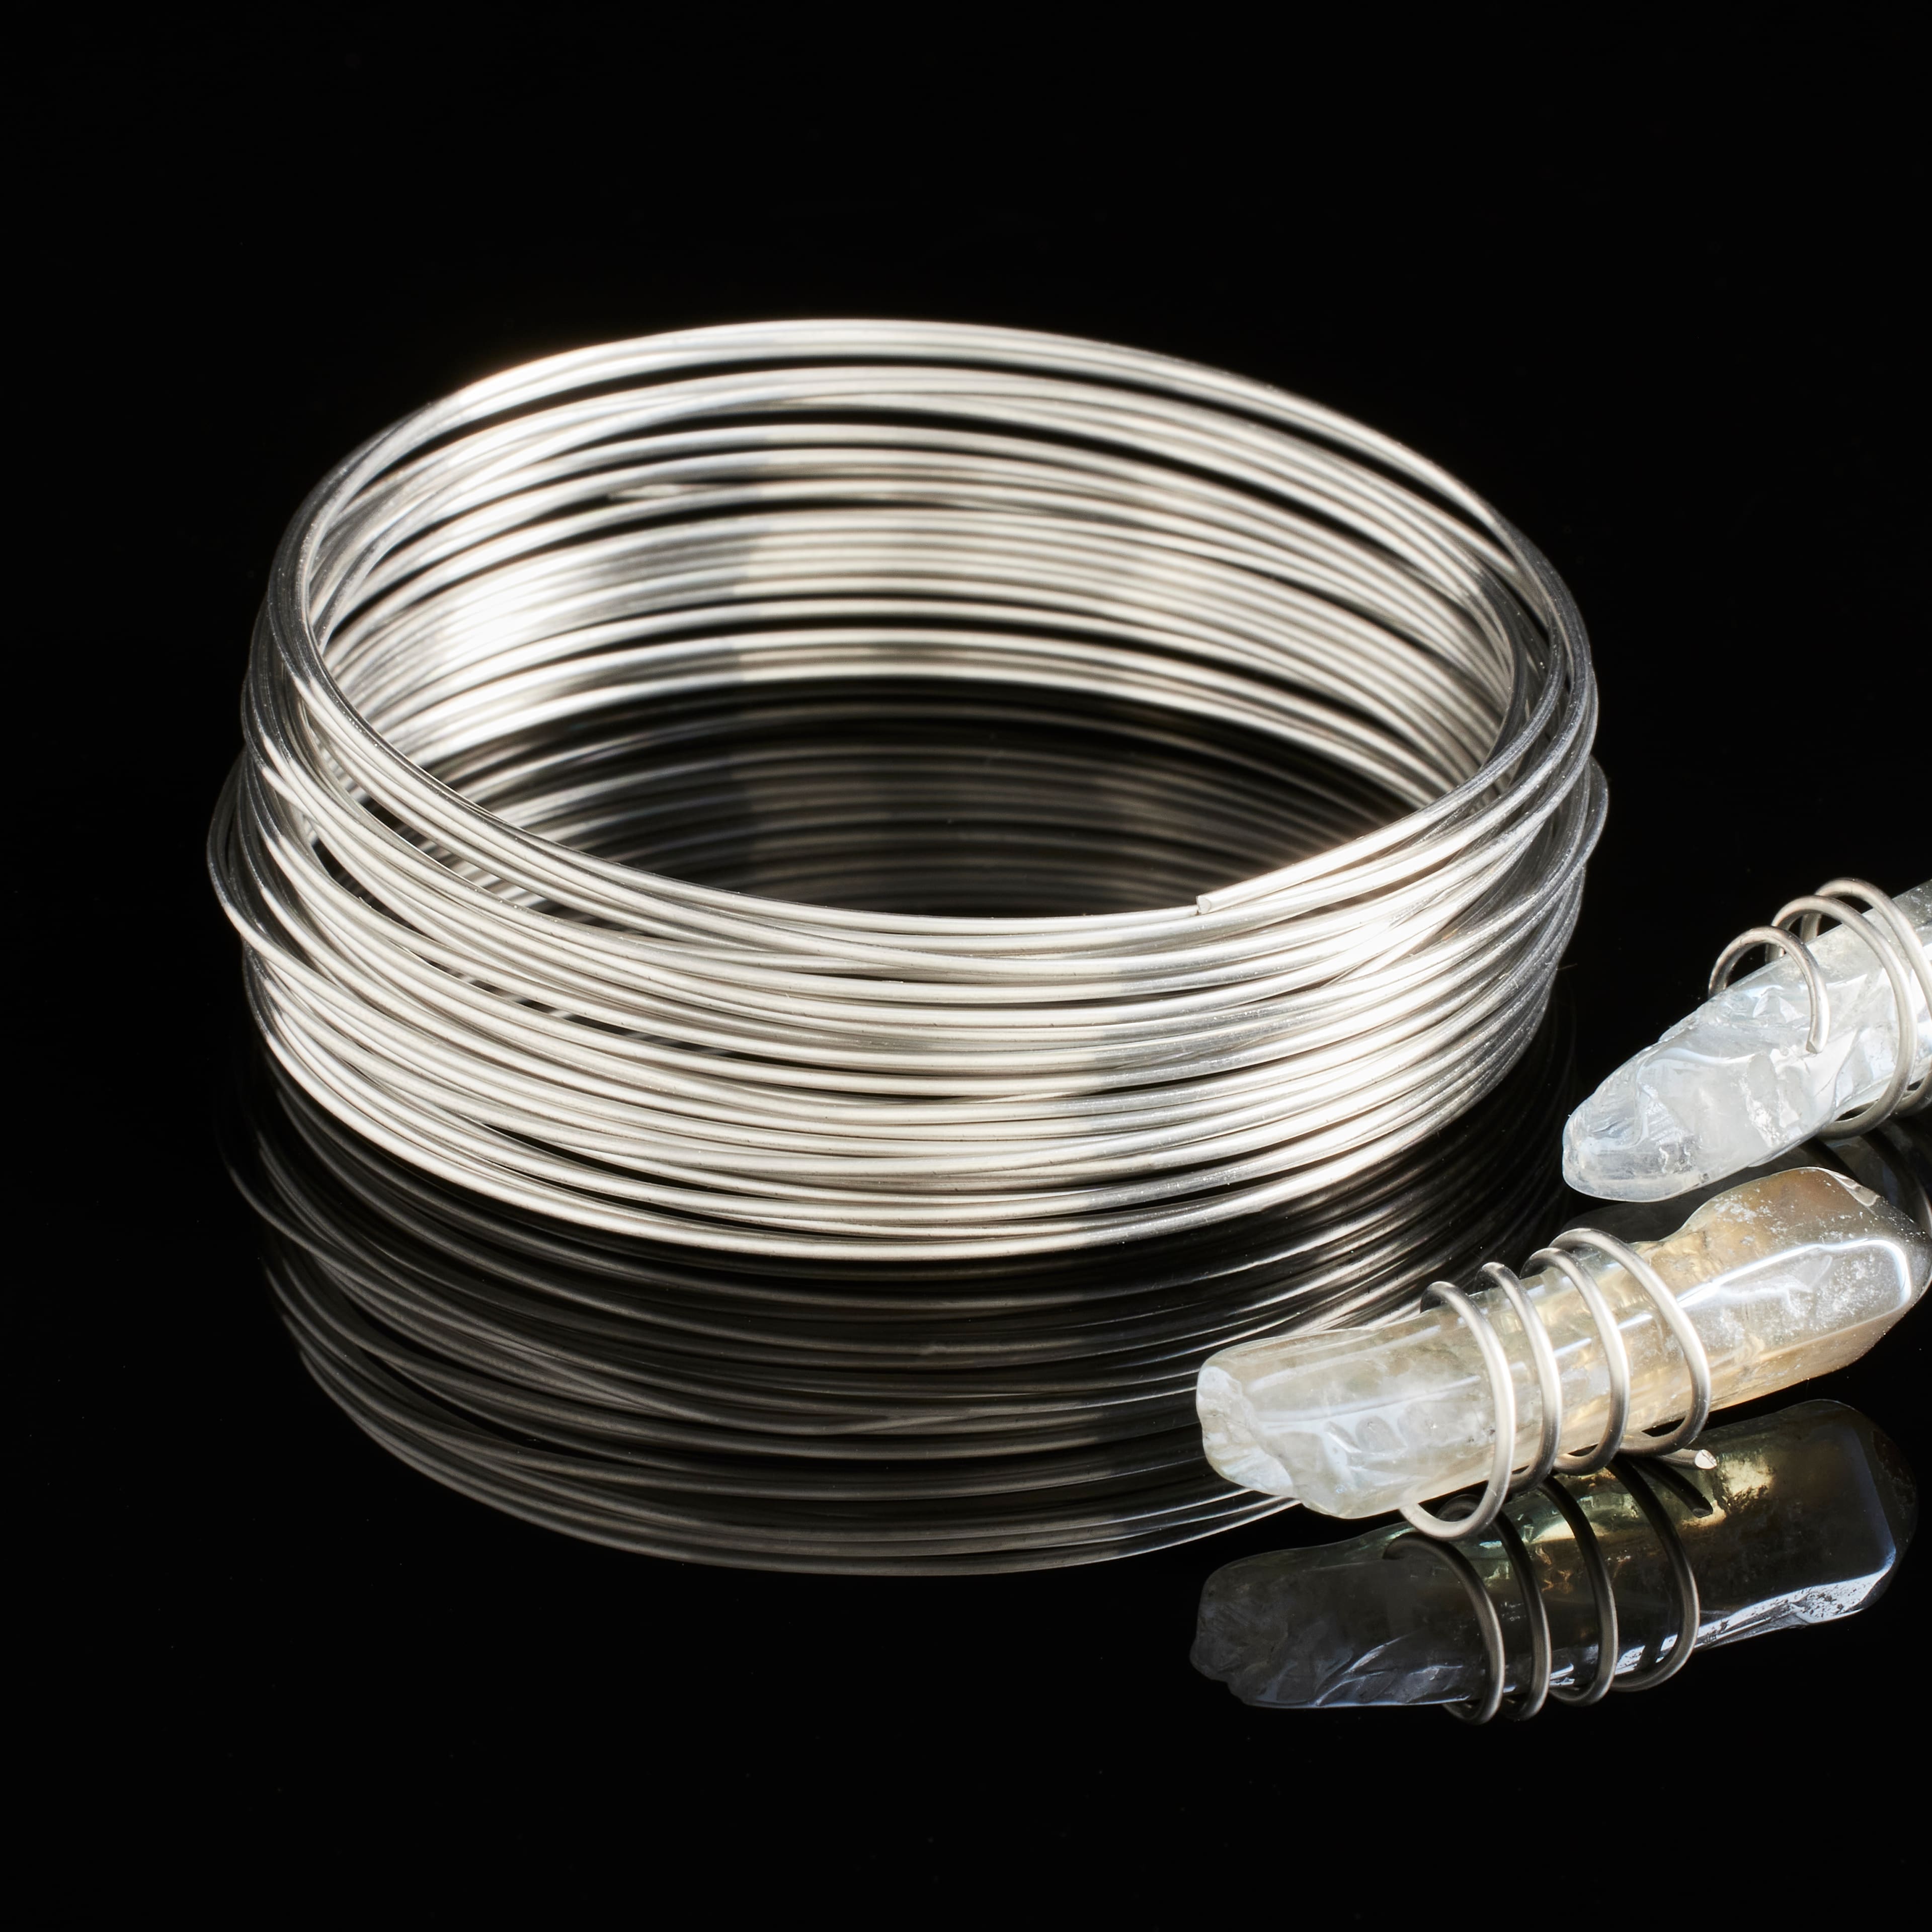 Beadalon&#xAE; 20 Gauge Round 316L Stainless Steel Wrapping Wire